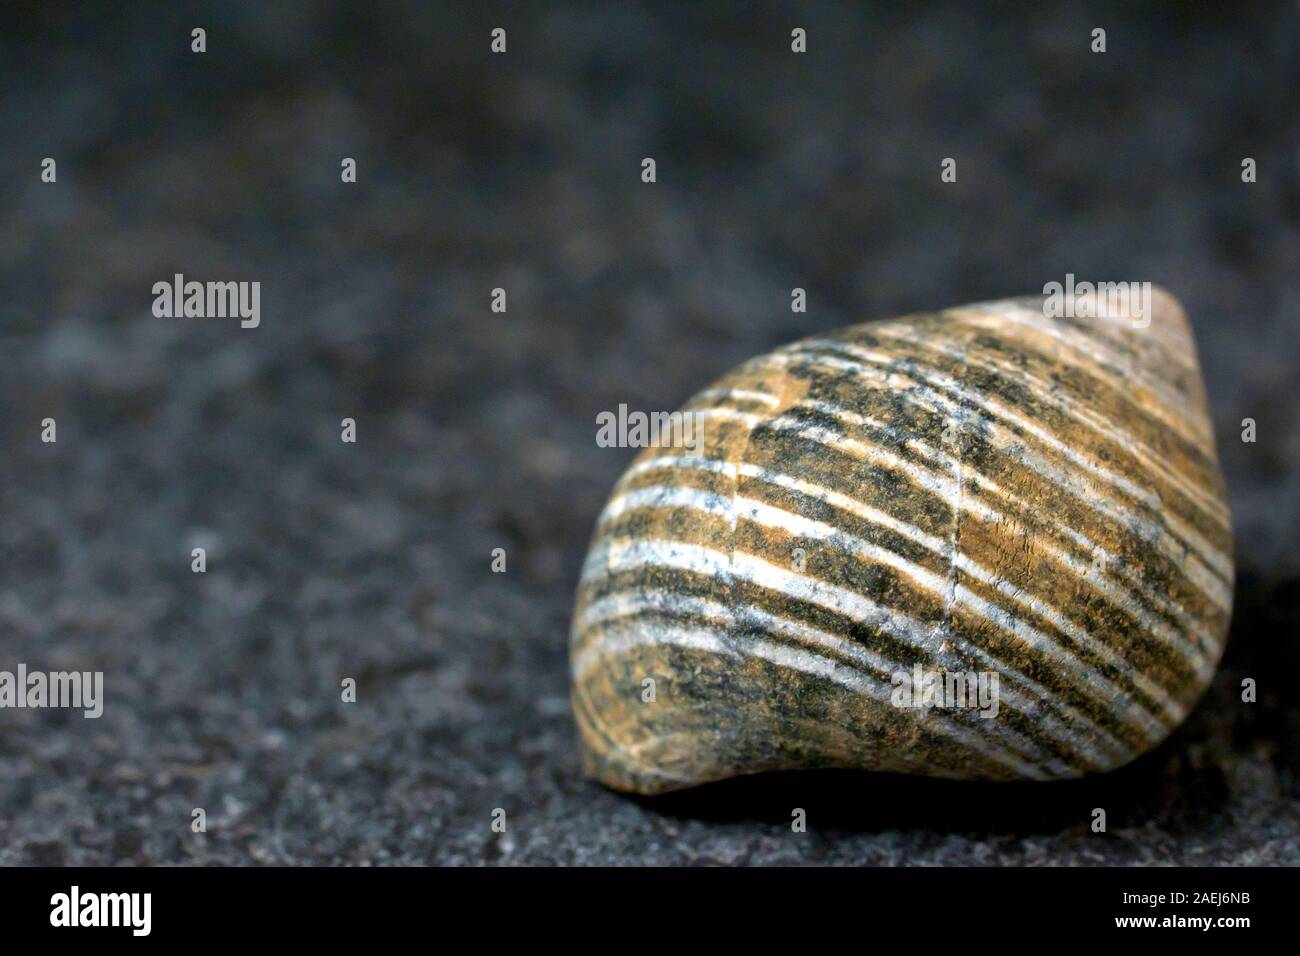 Close up still life of a common sea shell, showing a banded structure to its make up. Stock Photo